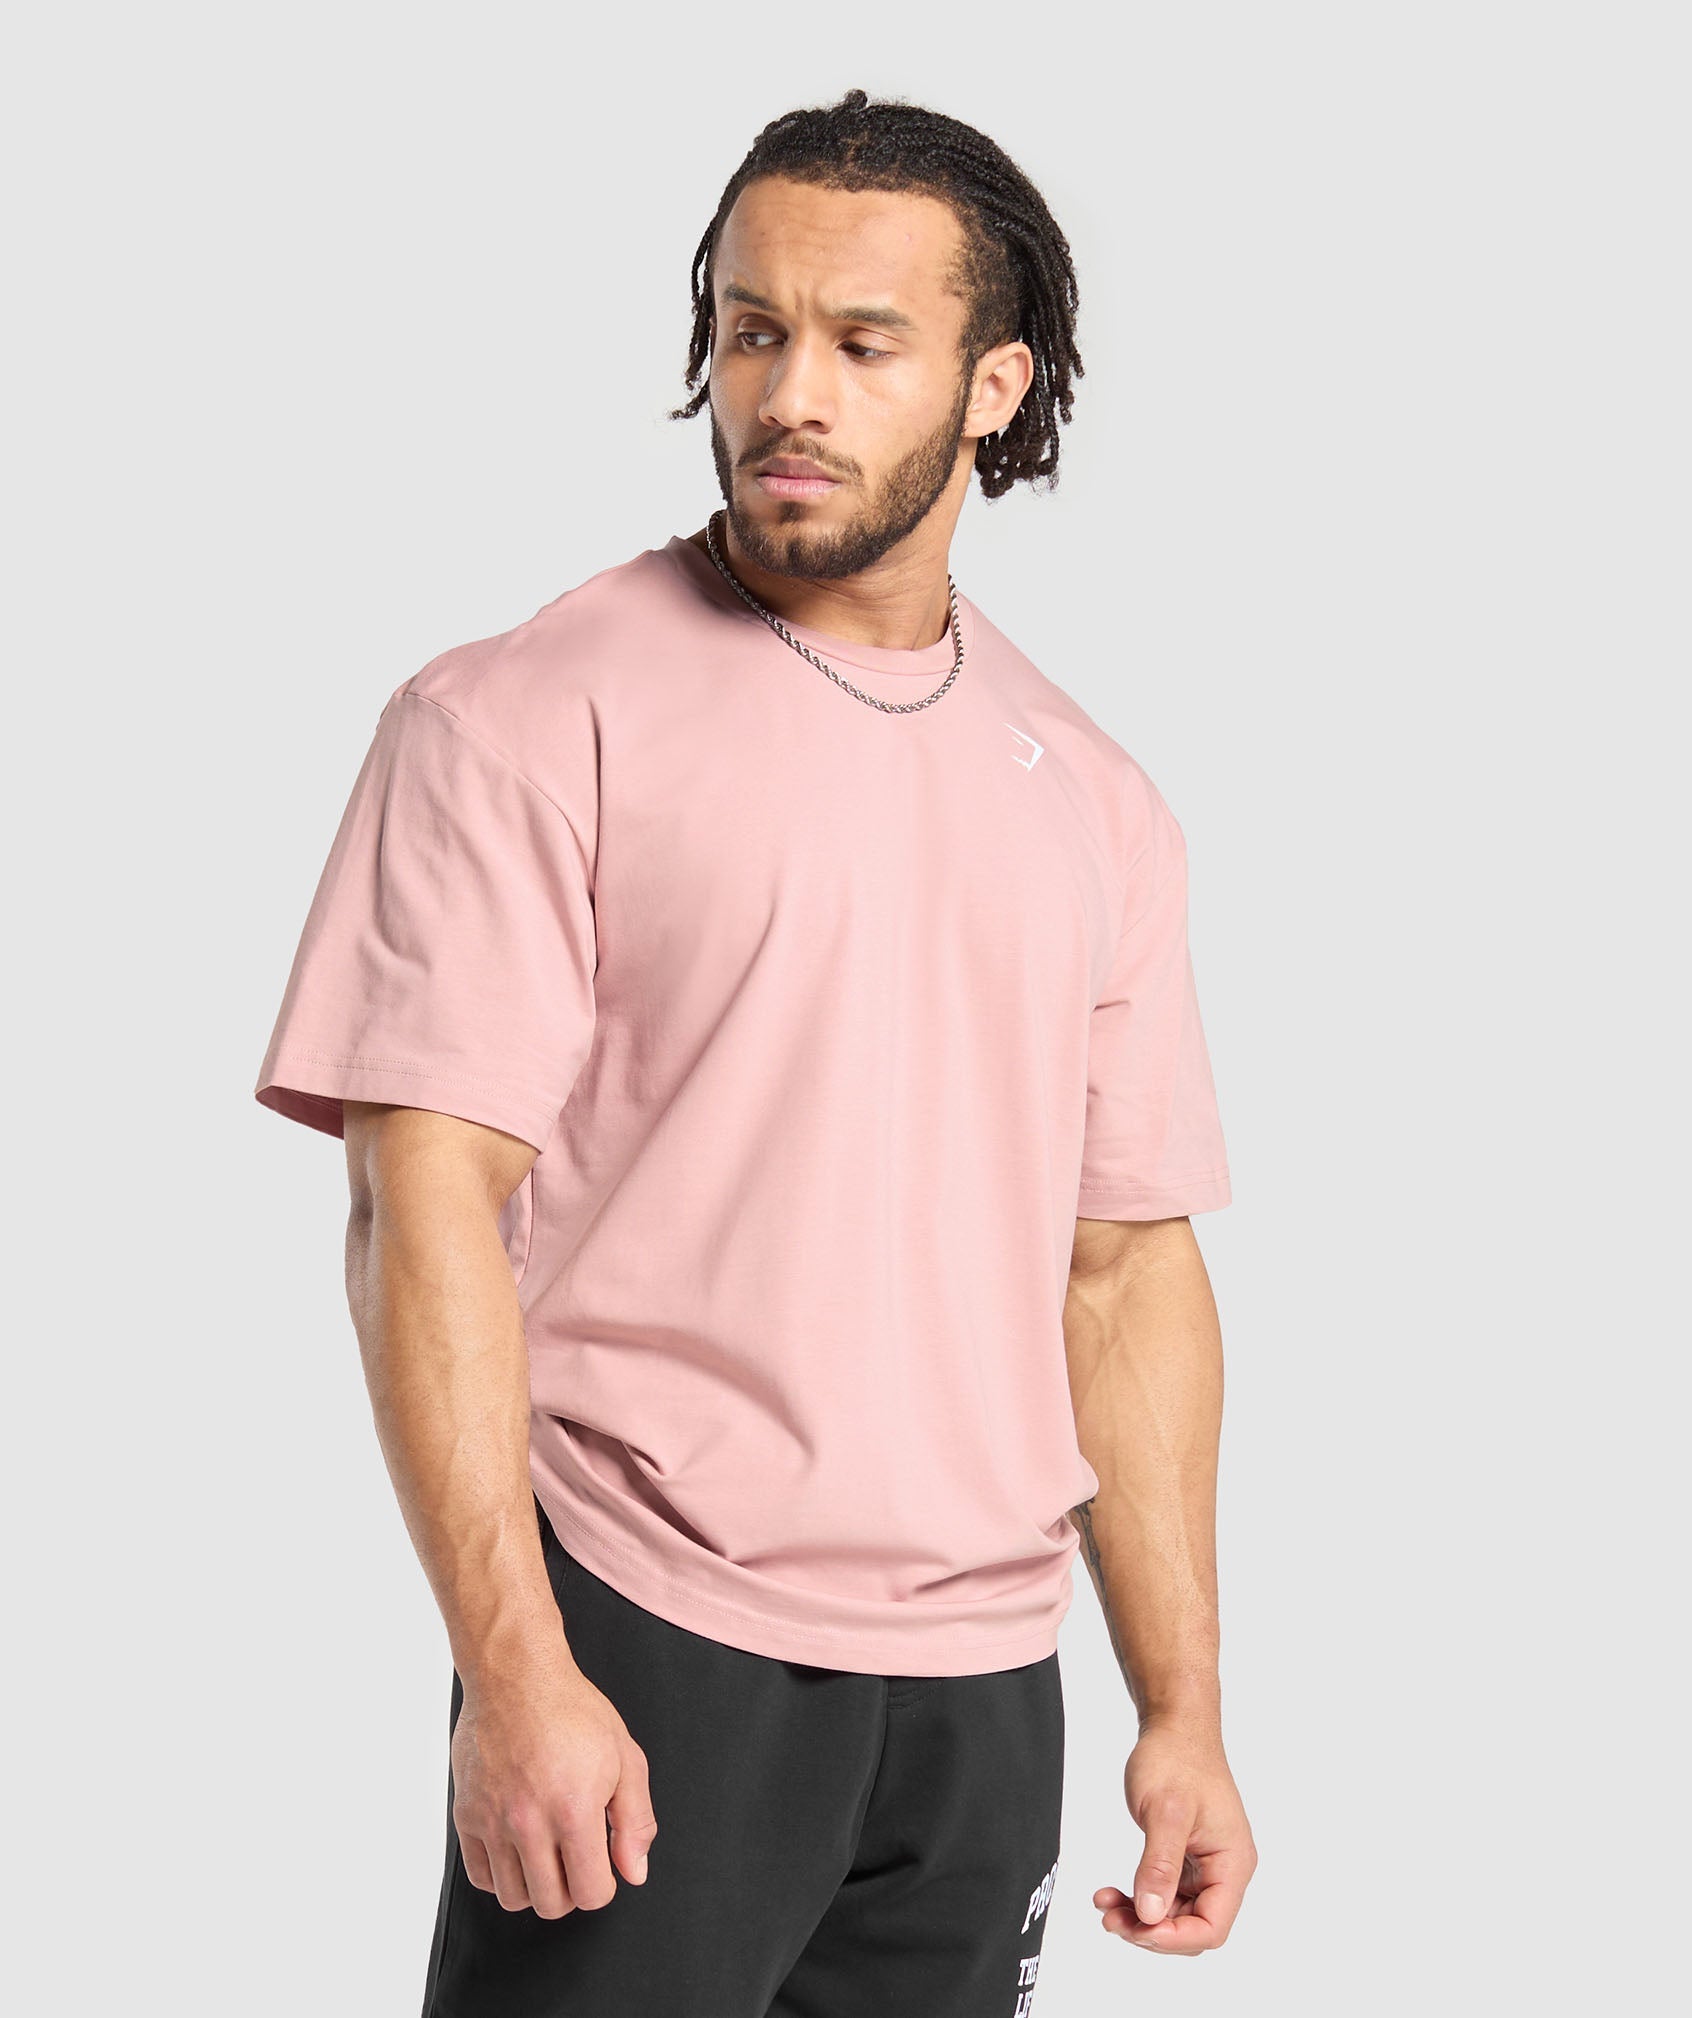 Heavy Duty Apparel T-Shirt in Light Pink - view 3